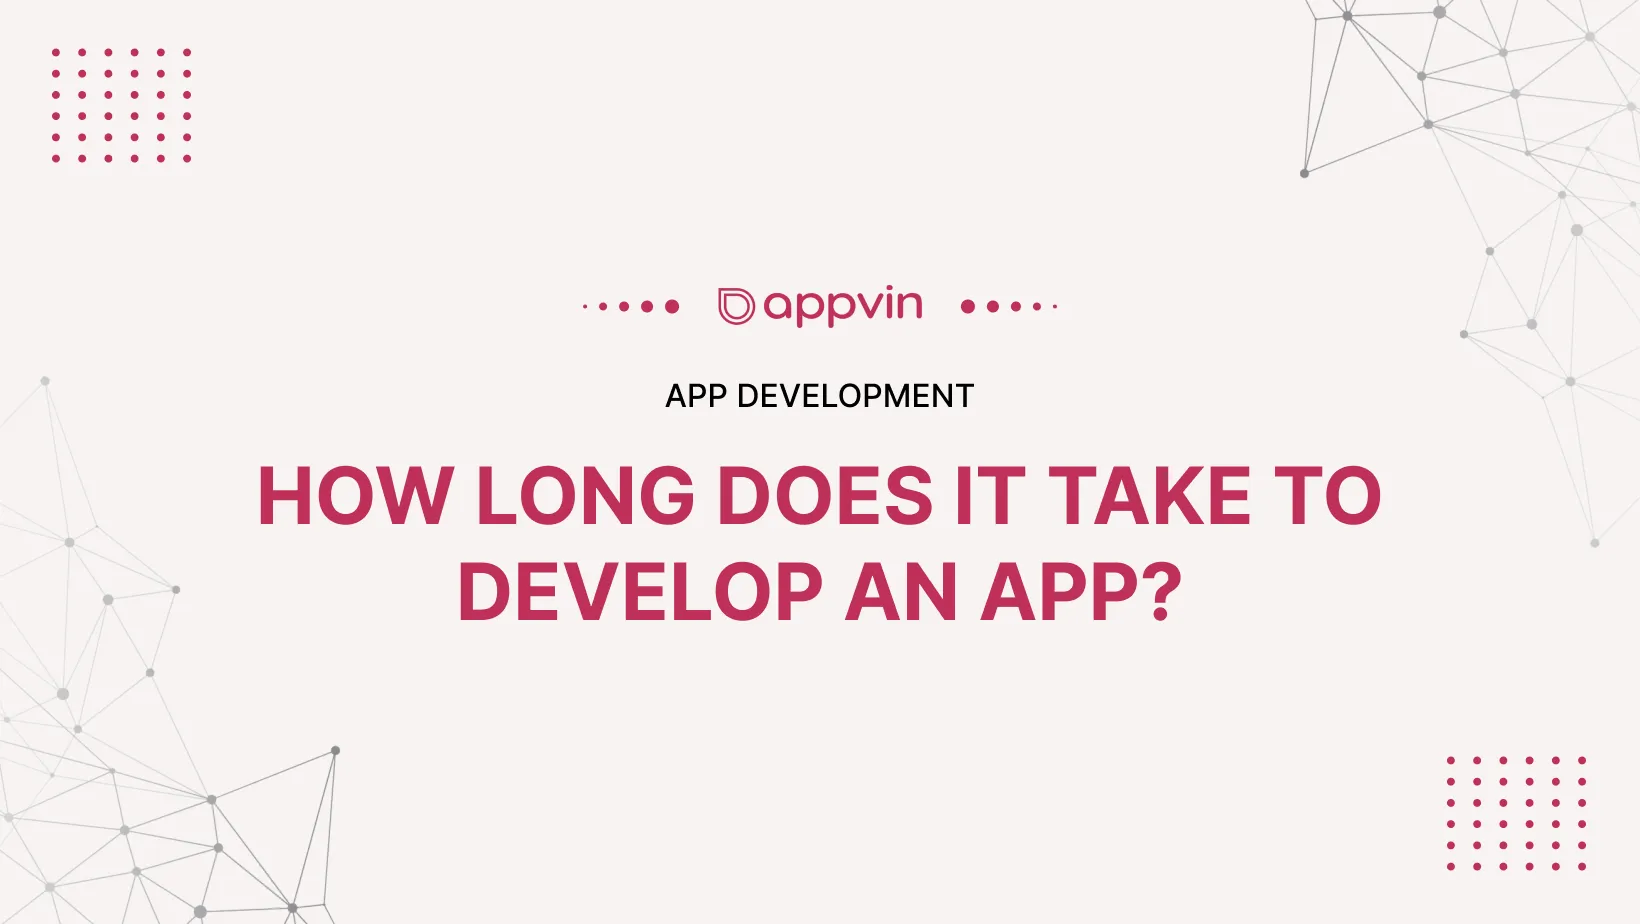 How Long Does It Take to Develop an App?